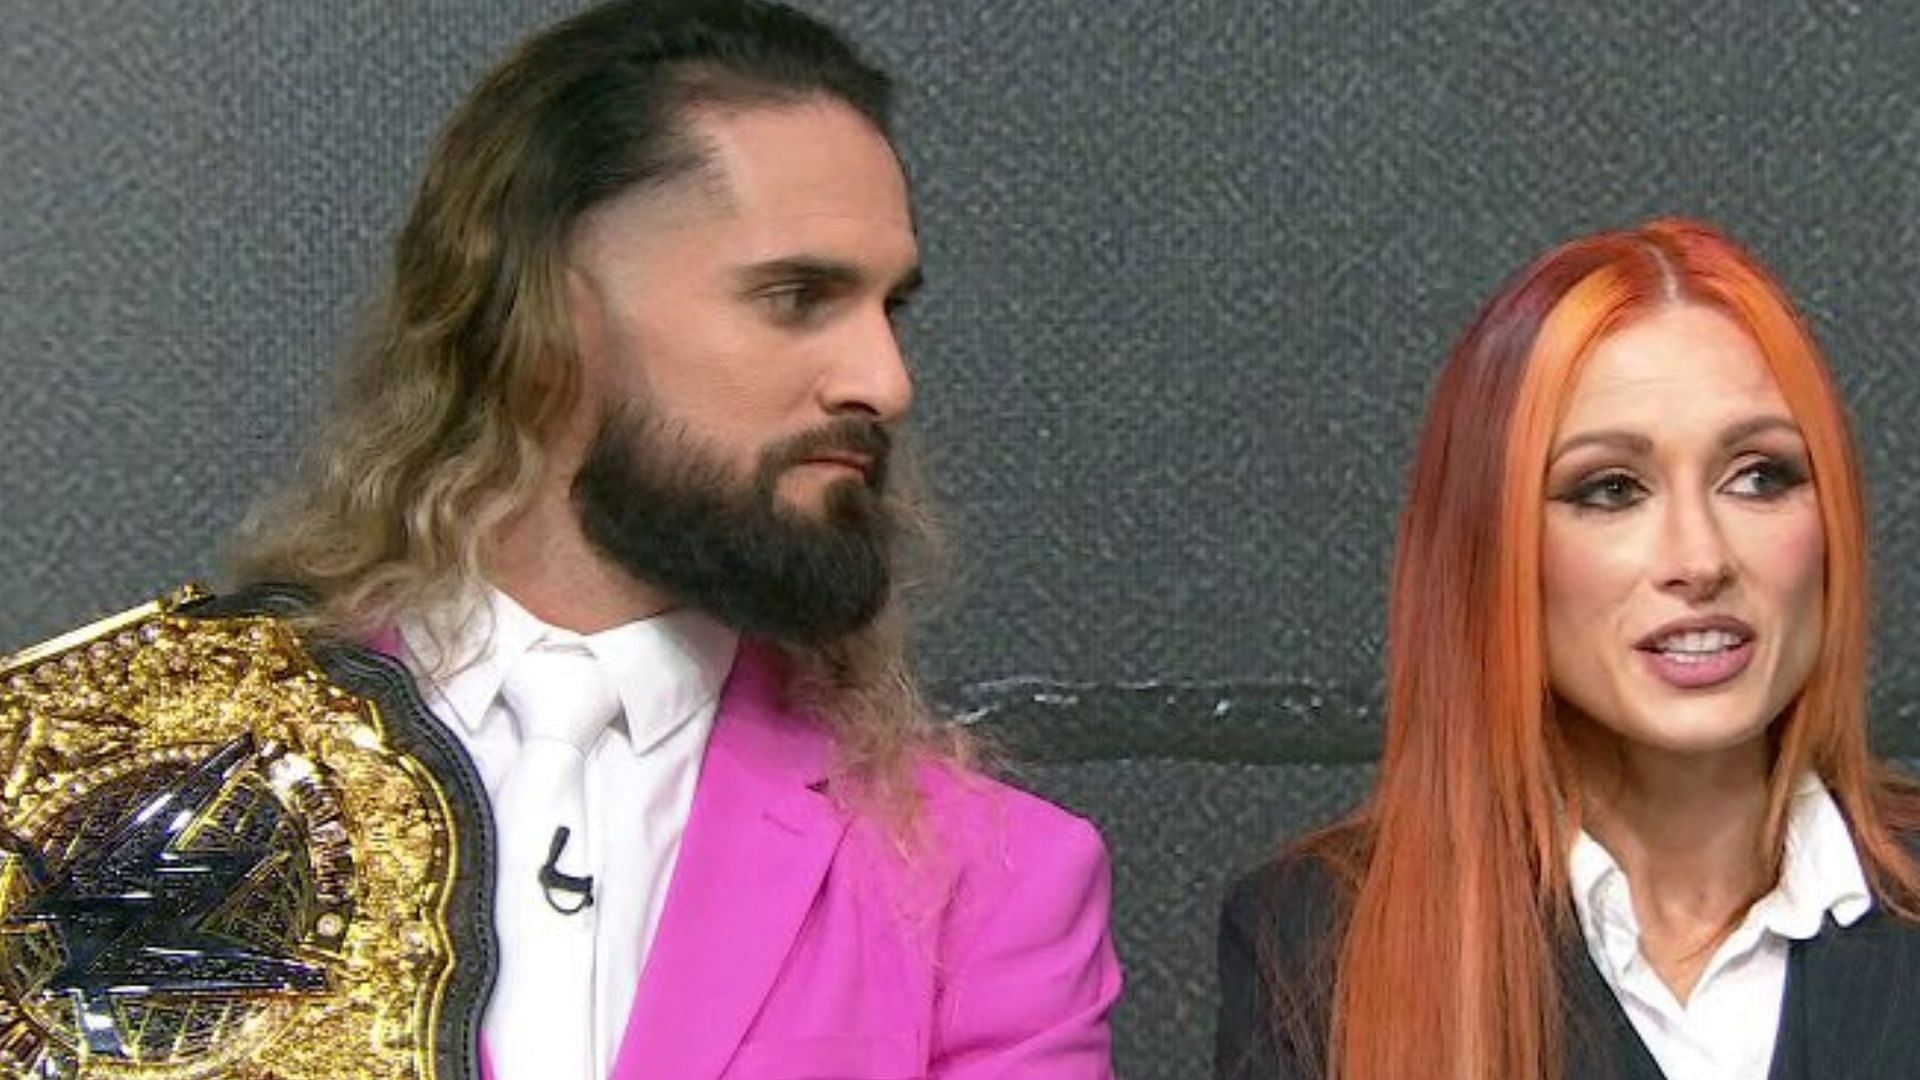 Seth Rollins and Becky Lynch promoting Money in the Bank in London.